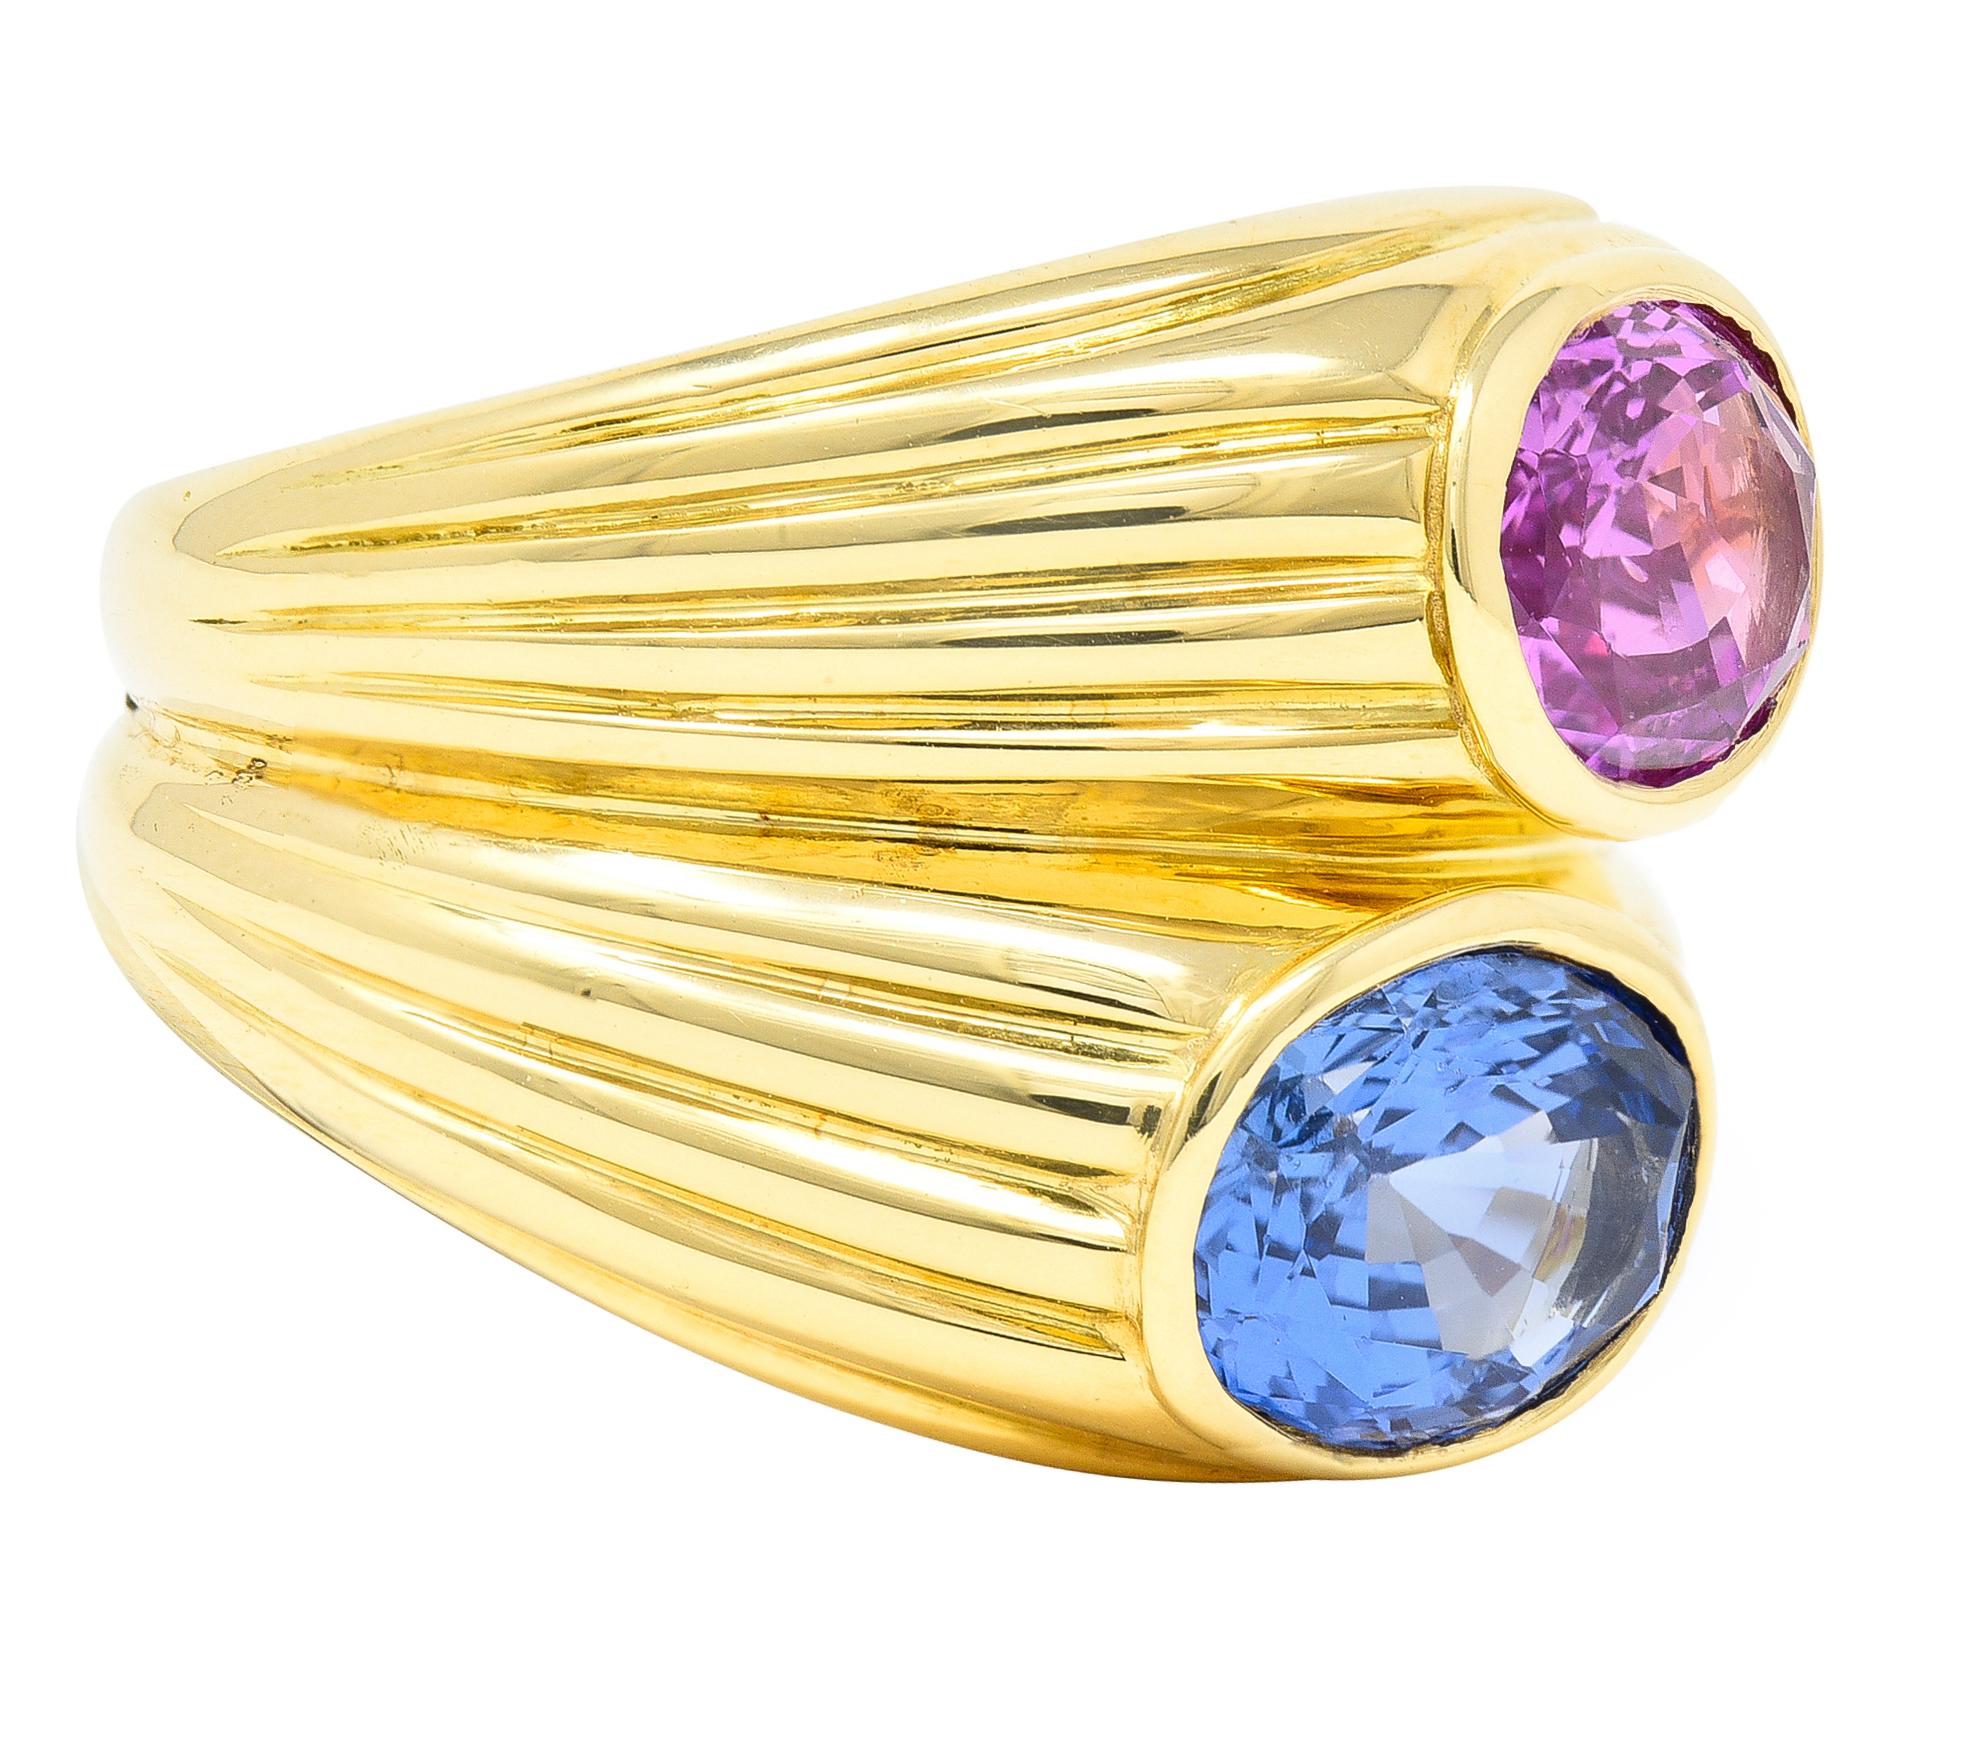 Centering two mixed cut oval sapphires one light blue and the other light purplish pink in color, Weighing 3.13 and 2.45 carats, respectively - juxtaposed North to South in high polish bezels. Flanked by fluted gold shoulders with split grooved